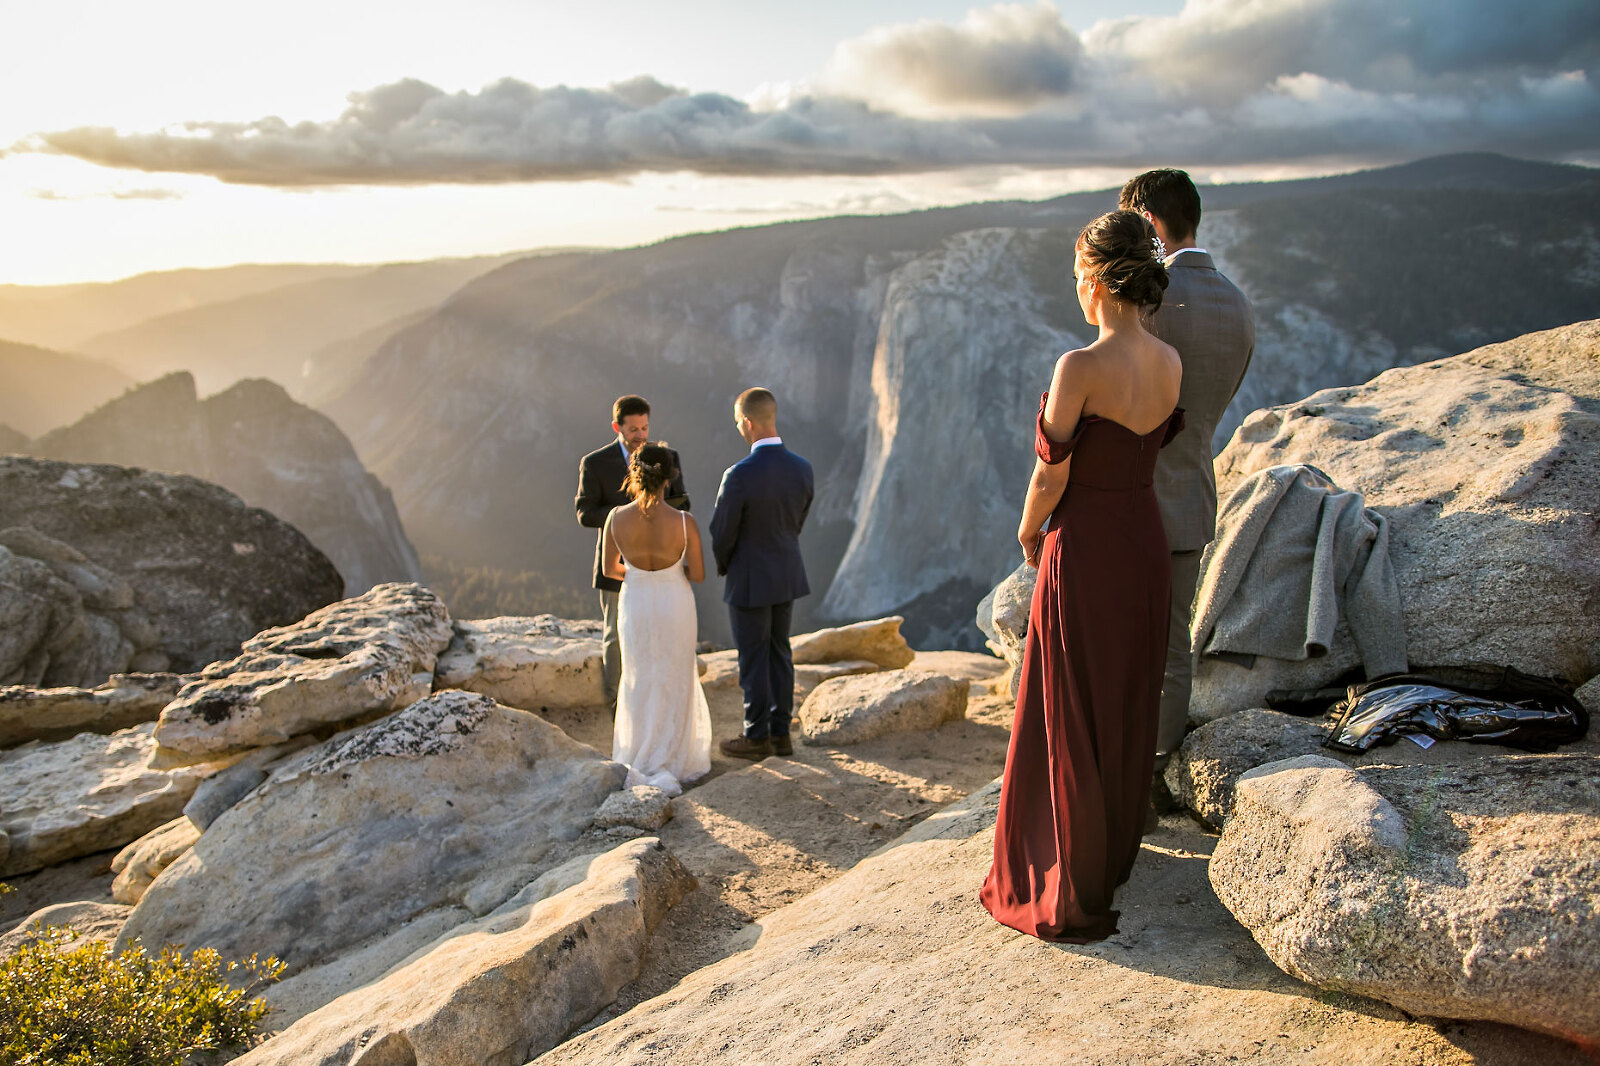 Elopement on cliff edge with friends, bride, and groom.